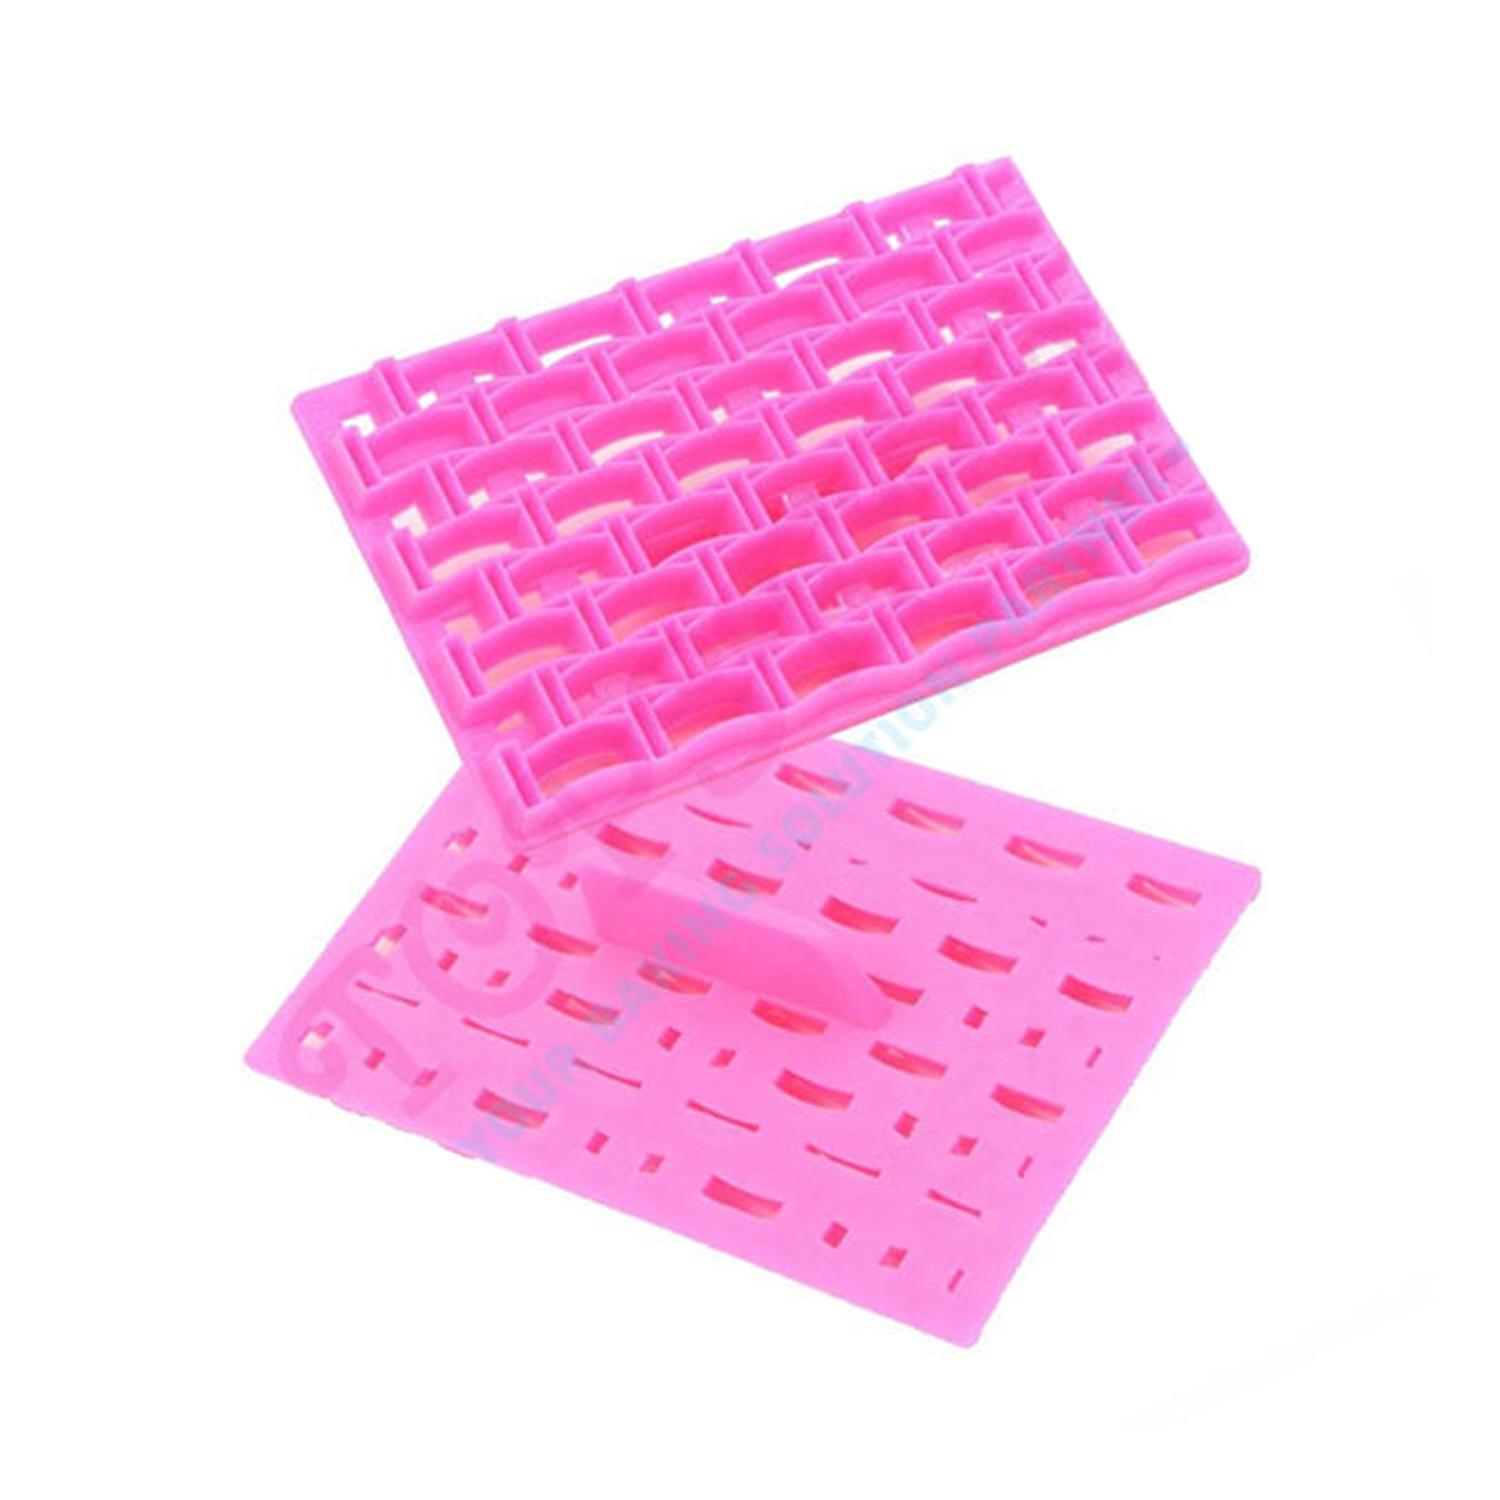 AOMILY GRID SHAPED EMBOSSING PLASTIC PRINTING CUTTER